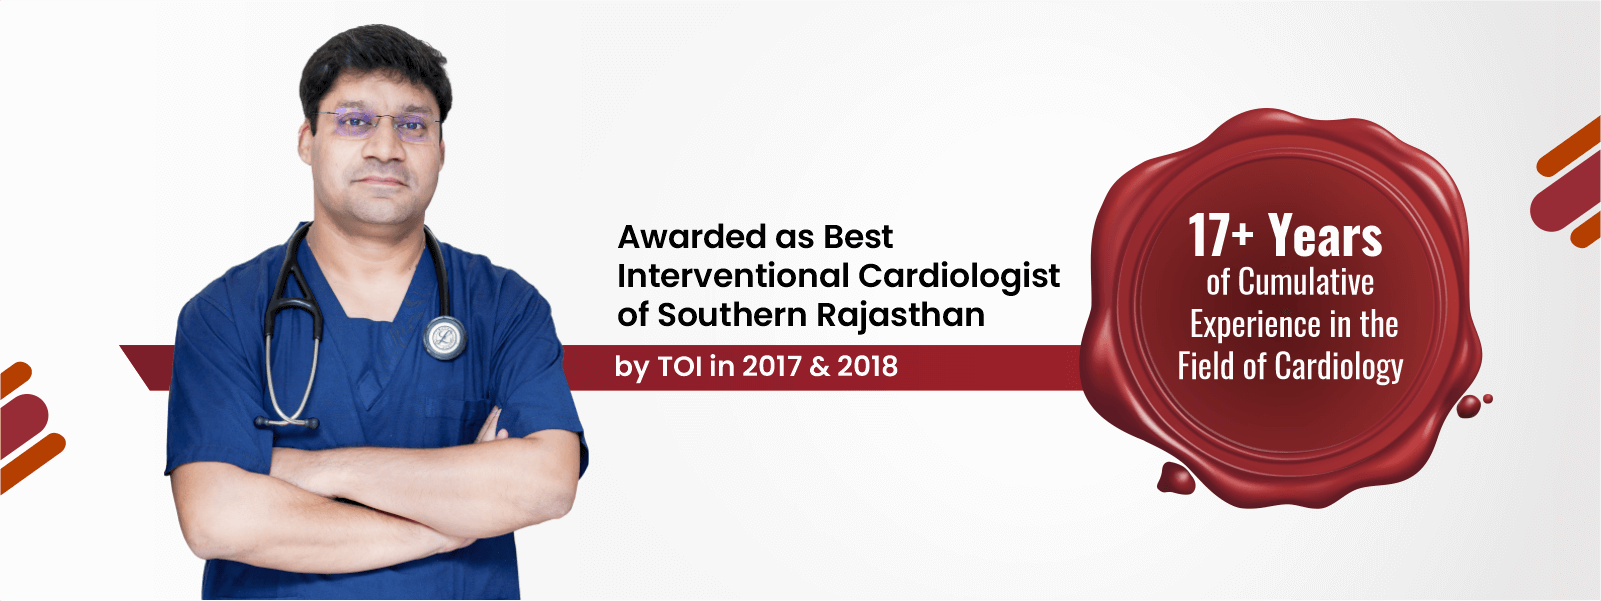 dr amit khandelwal, heart doctor in udaipur, best heart doctor in udaipur